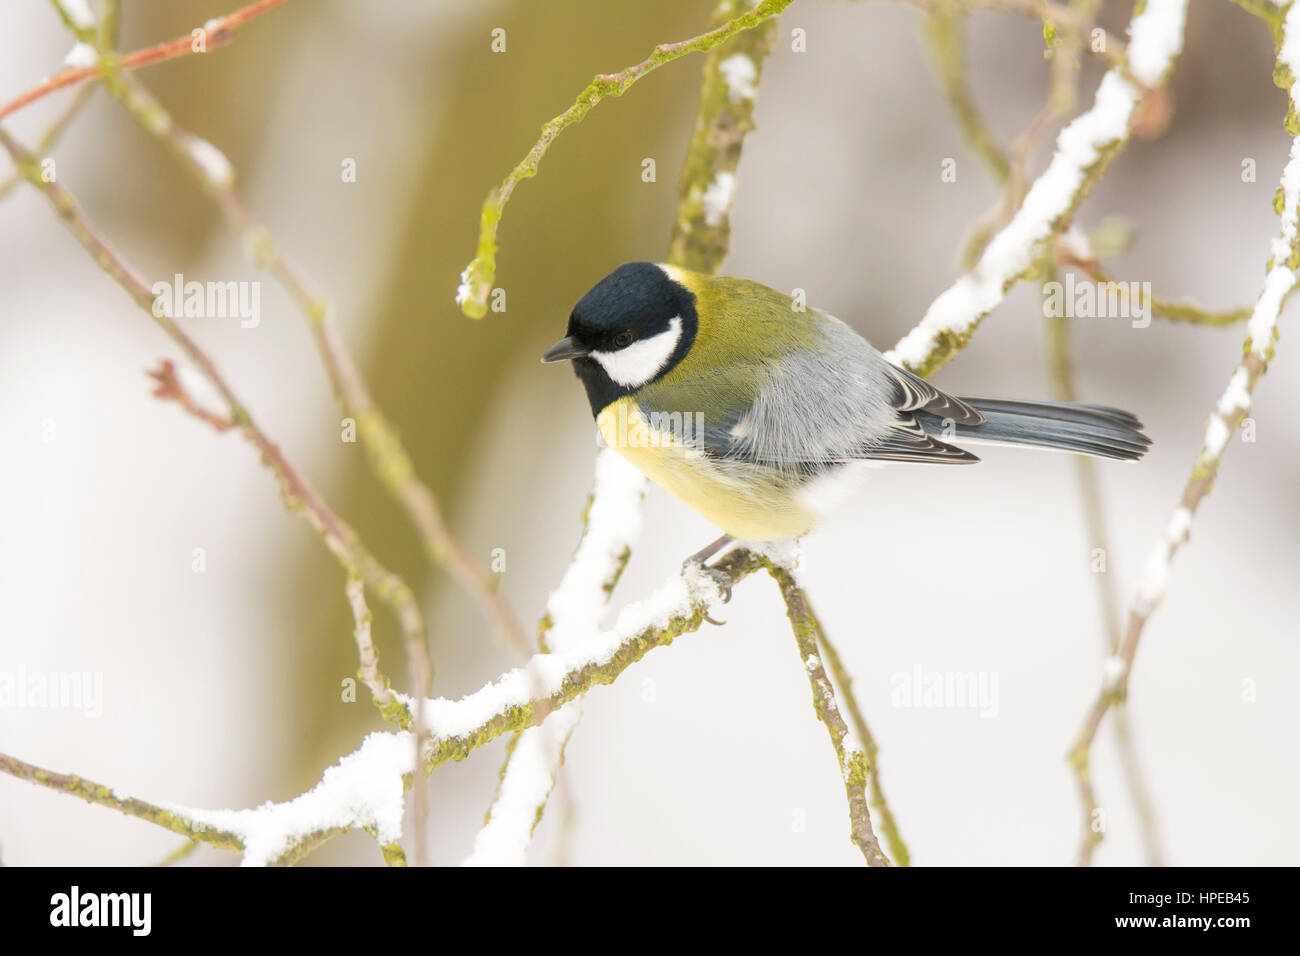 Closeup of a Great tit bird sitting on the branch of a snow covered tree Stock Photo